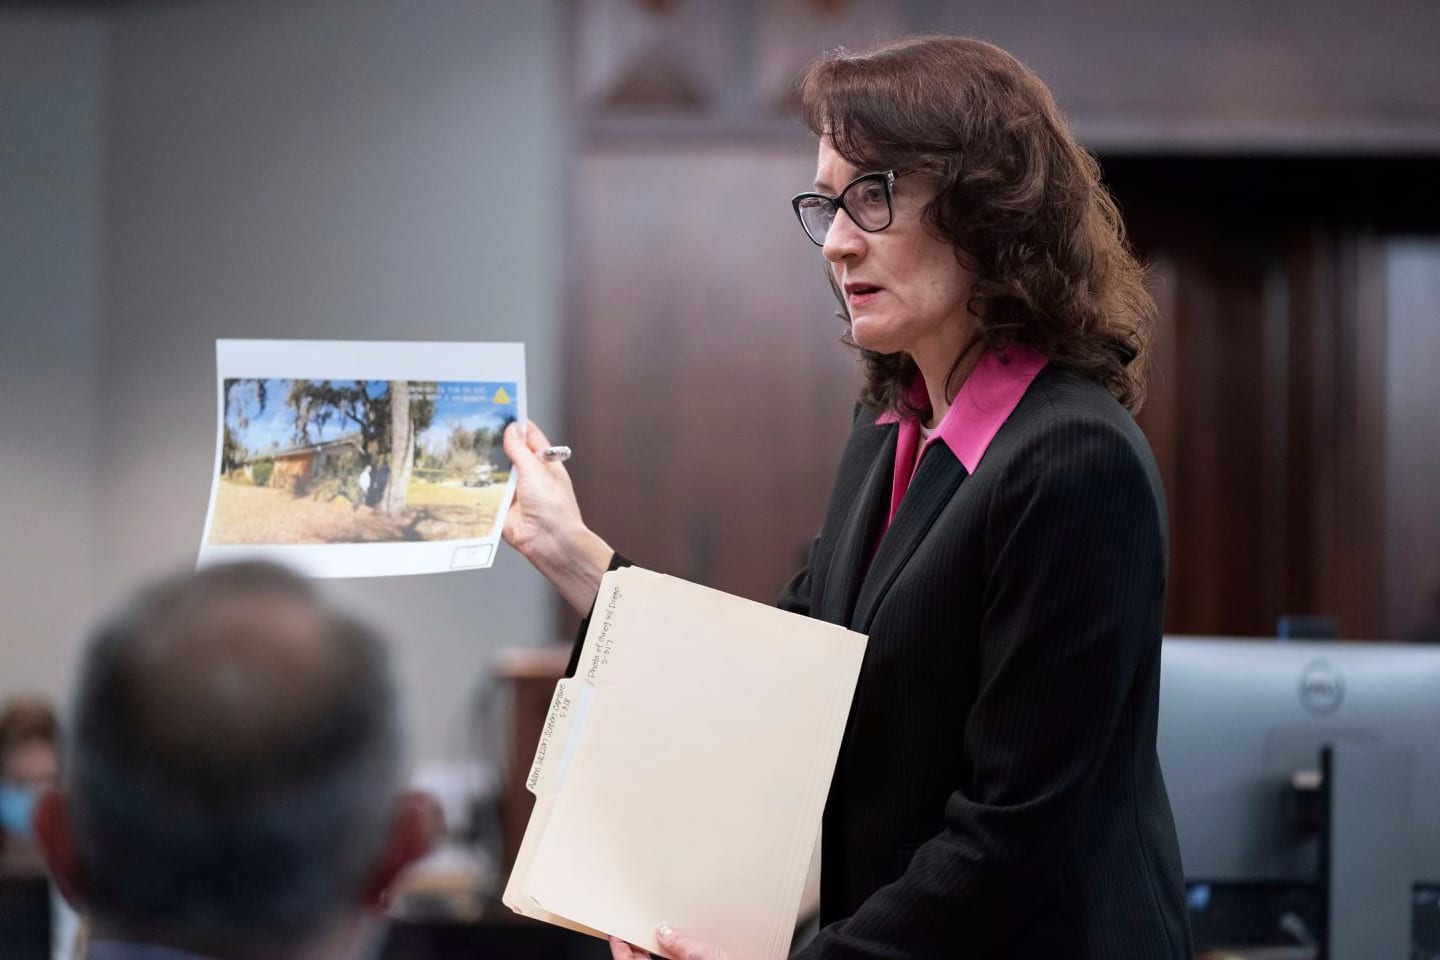 Prosecutor Linda Dunikoski shares evidence during trial at the Glynn County Courthouse, Monday, Nov. 8, 2021, in Brunswick, Ga. Greg McMichael and his son Travis McMichael and a neighbor, William "Roddie" Bryan, are charged with the February 2020 slaying of 25-year-old Ahmaud Arbery.